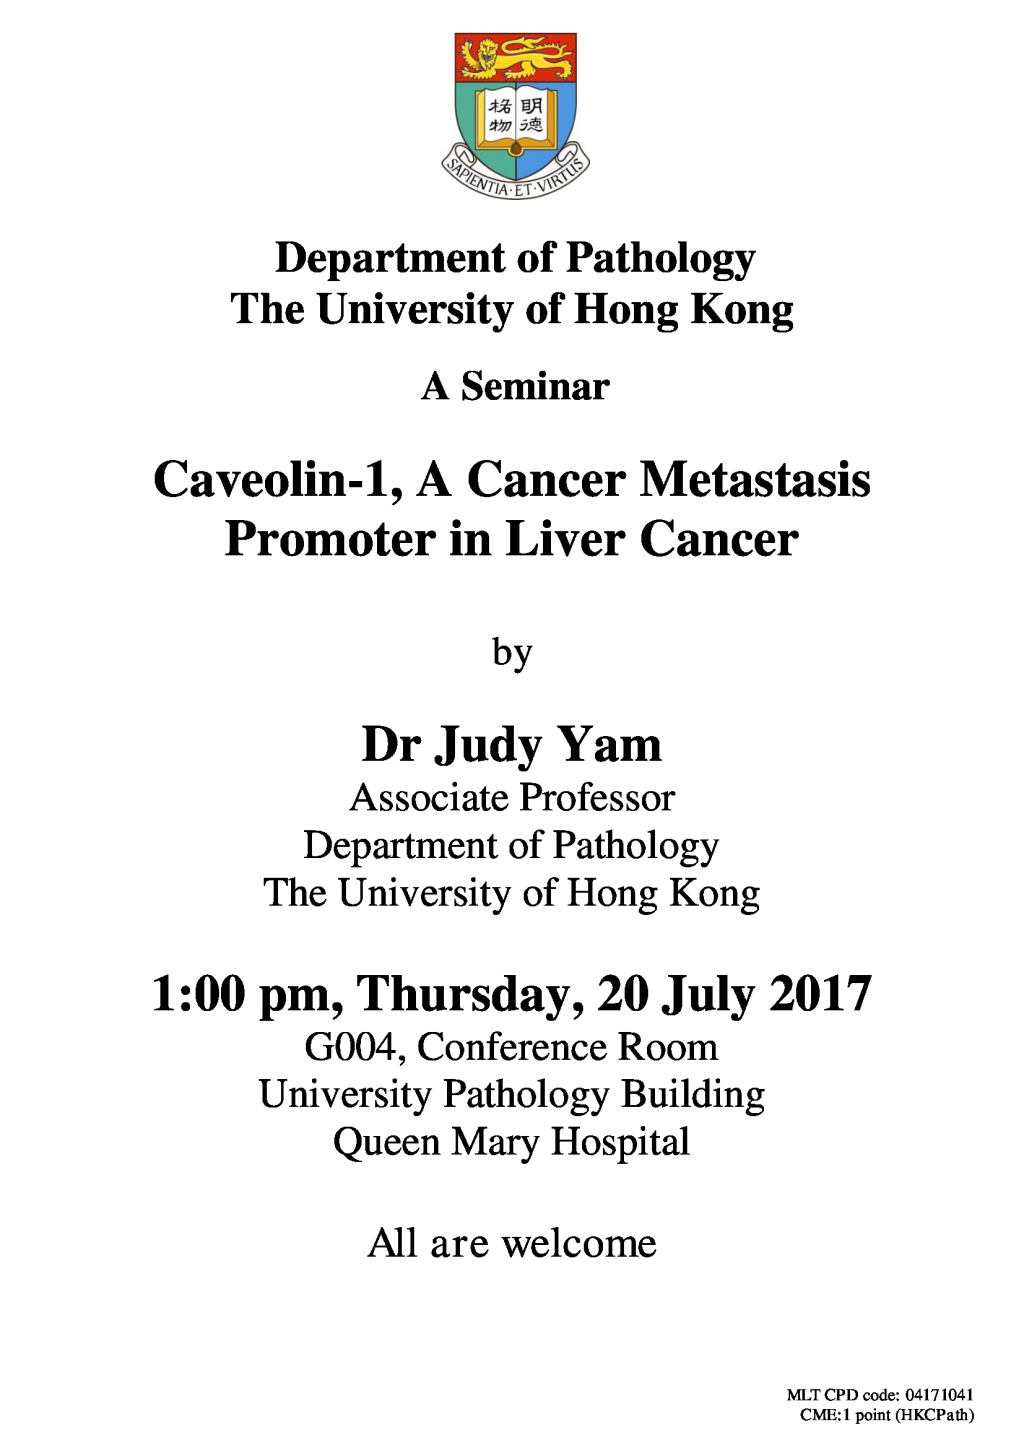 A Seminar Caveolin-1, A Cancer Metastasis Promoter in Liver Cancer by Dr Judy Yam on 20 July 2017